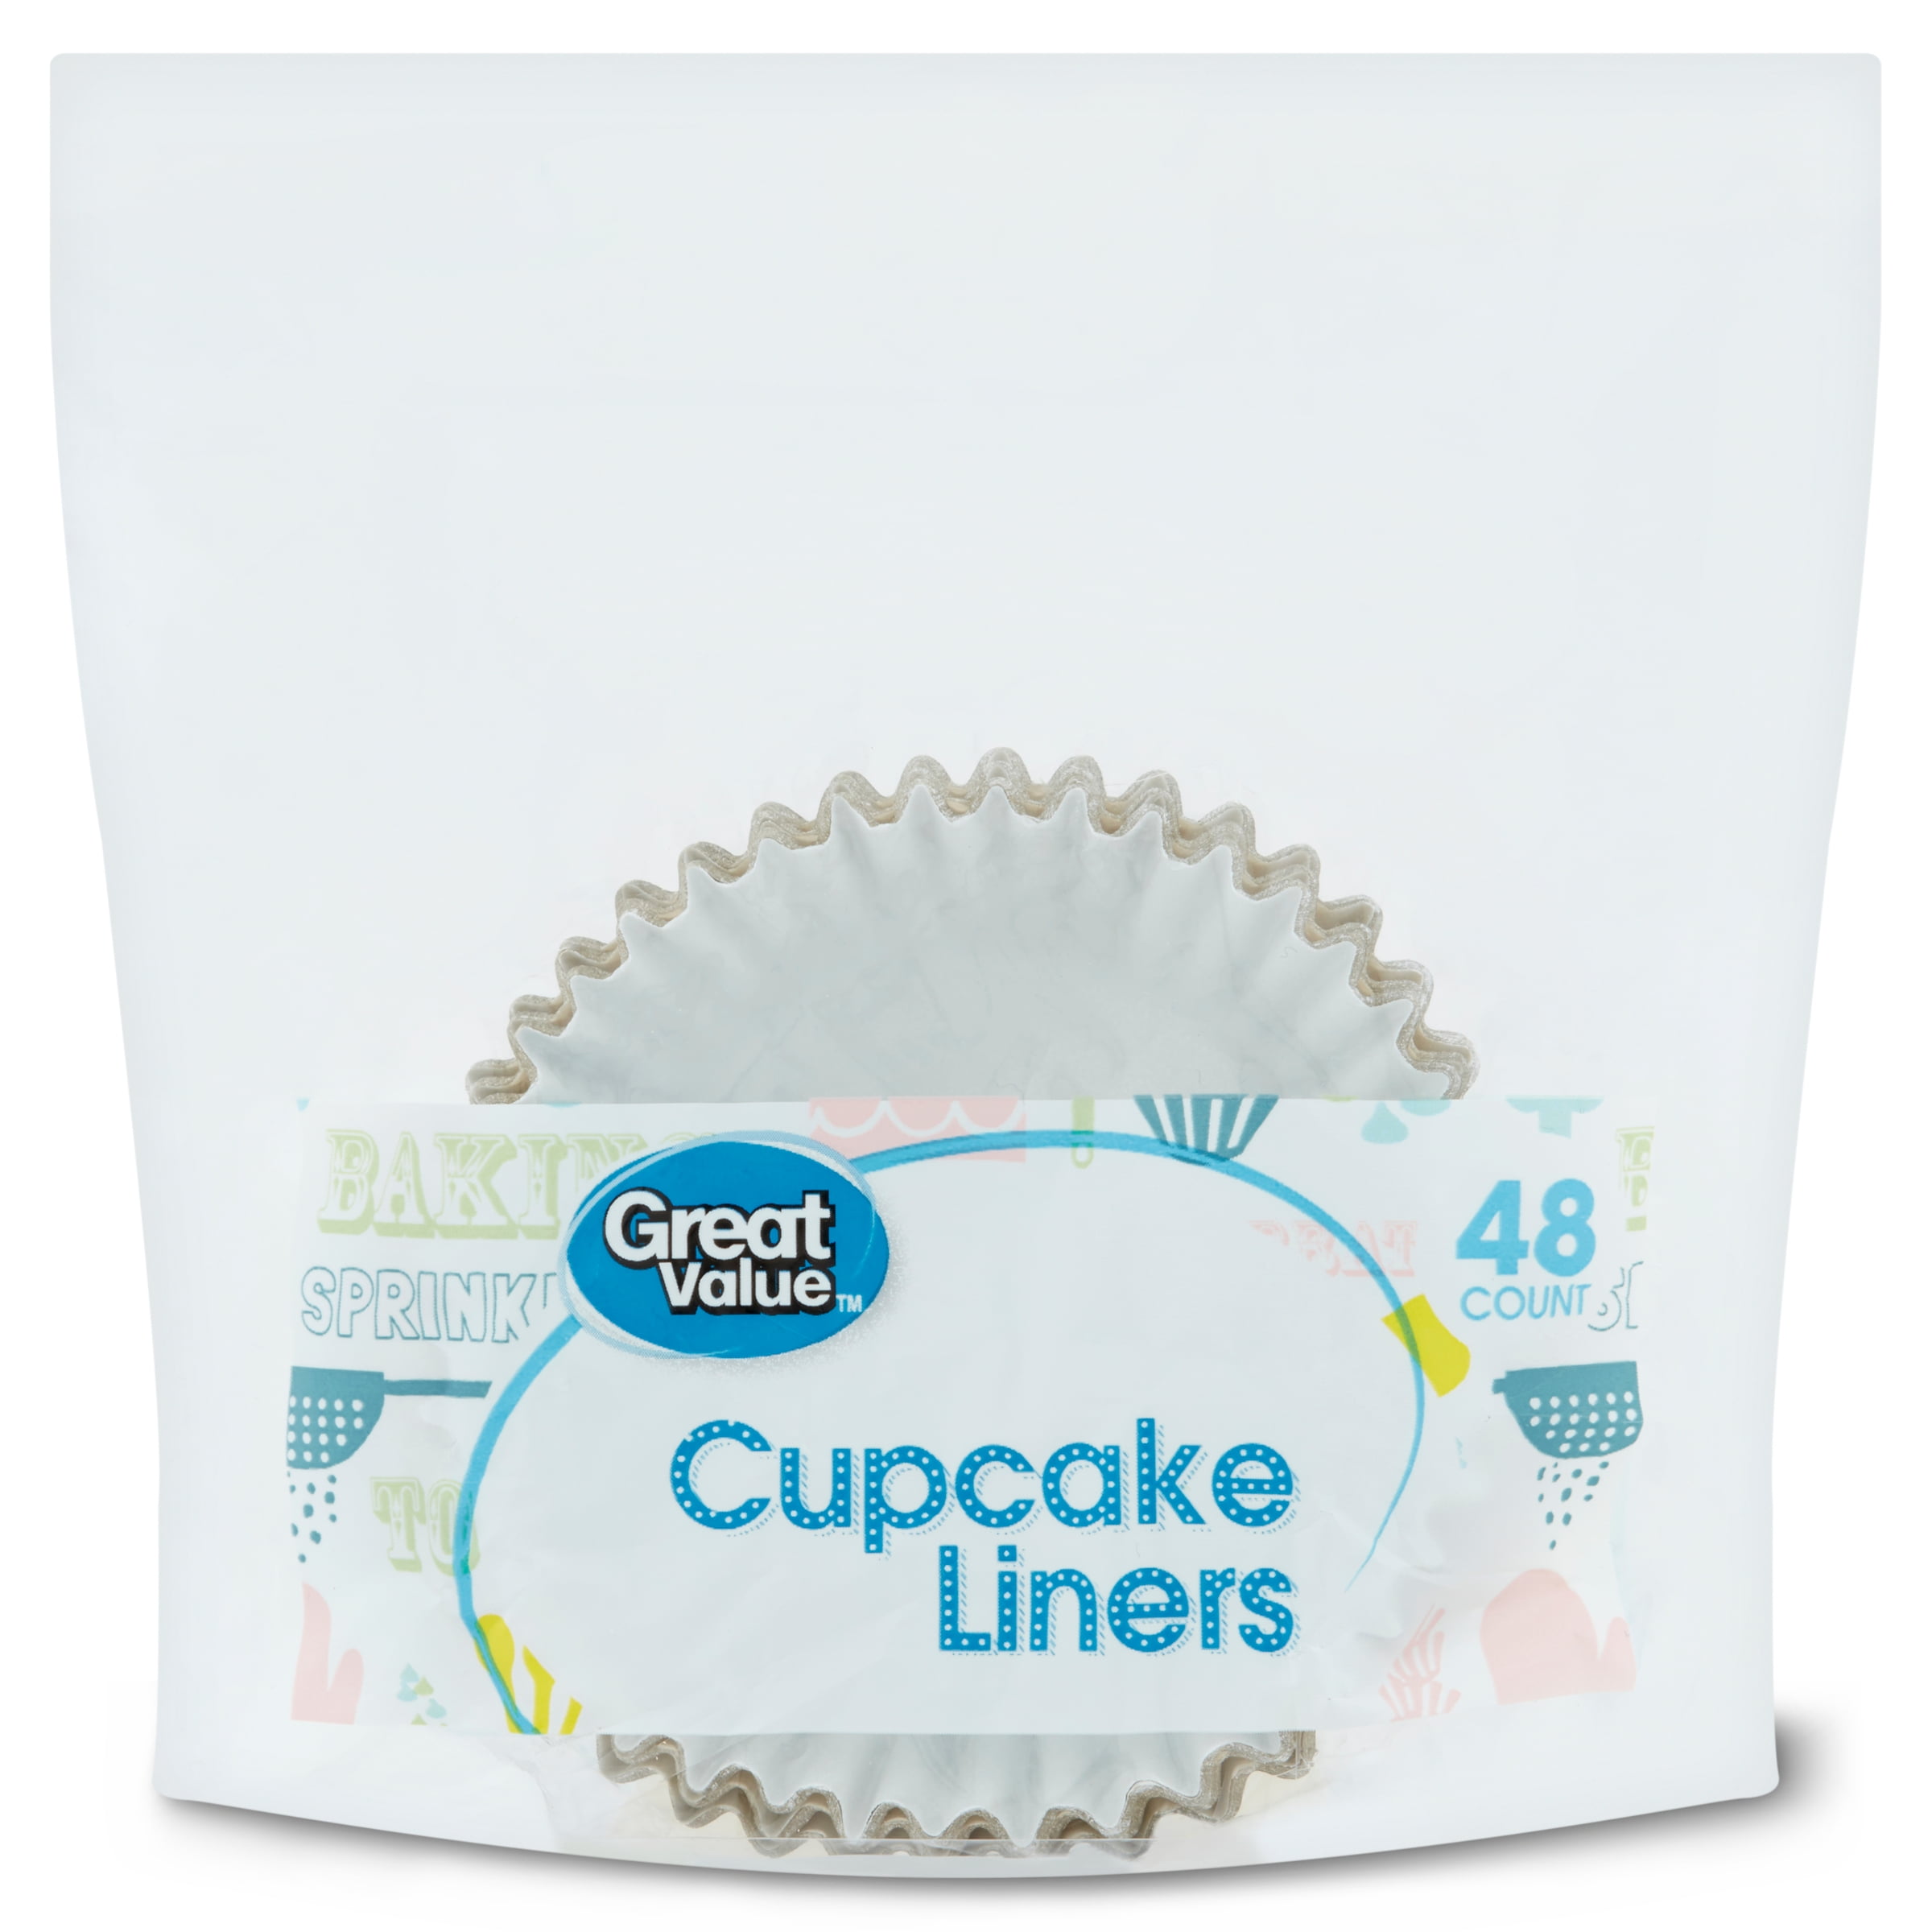 Great Value Cupcake Liners, Gold, 48 Count